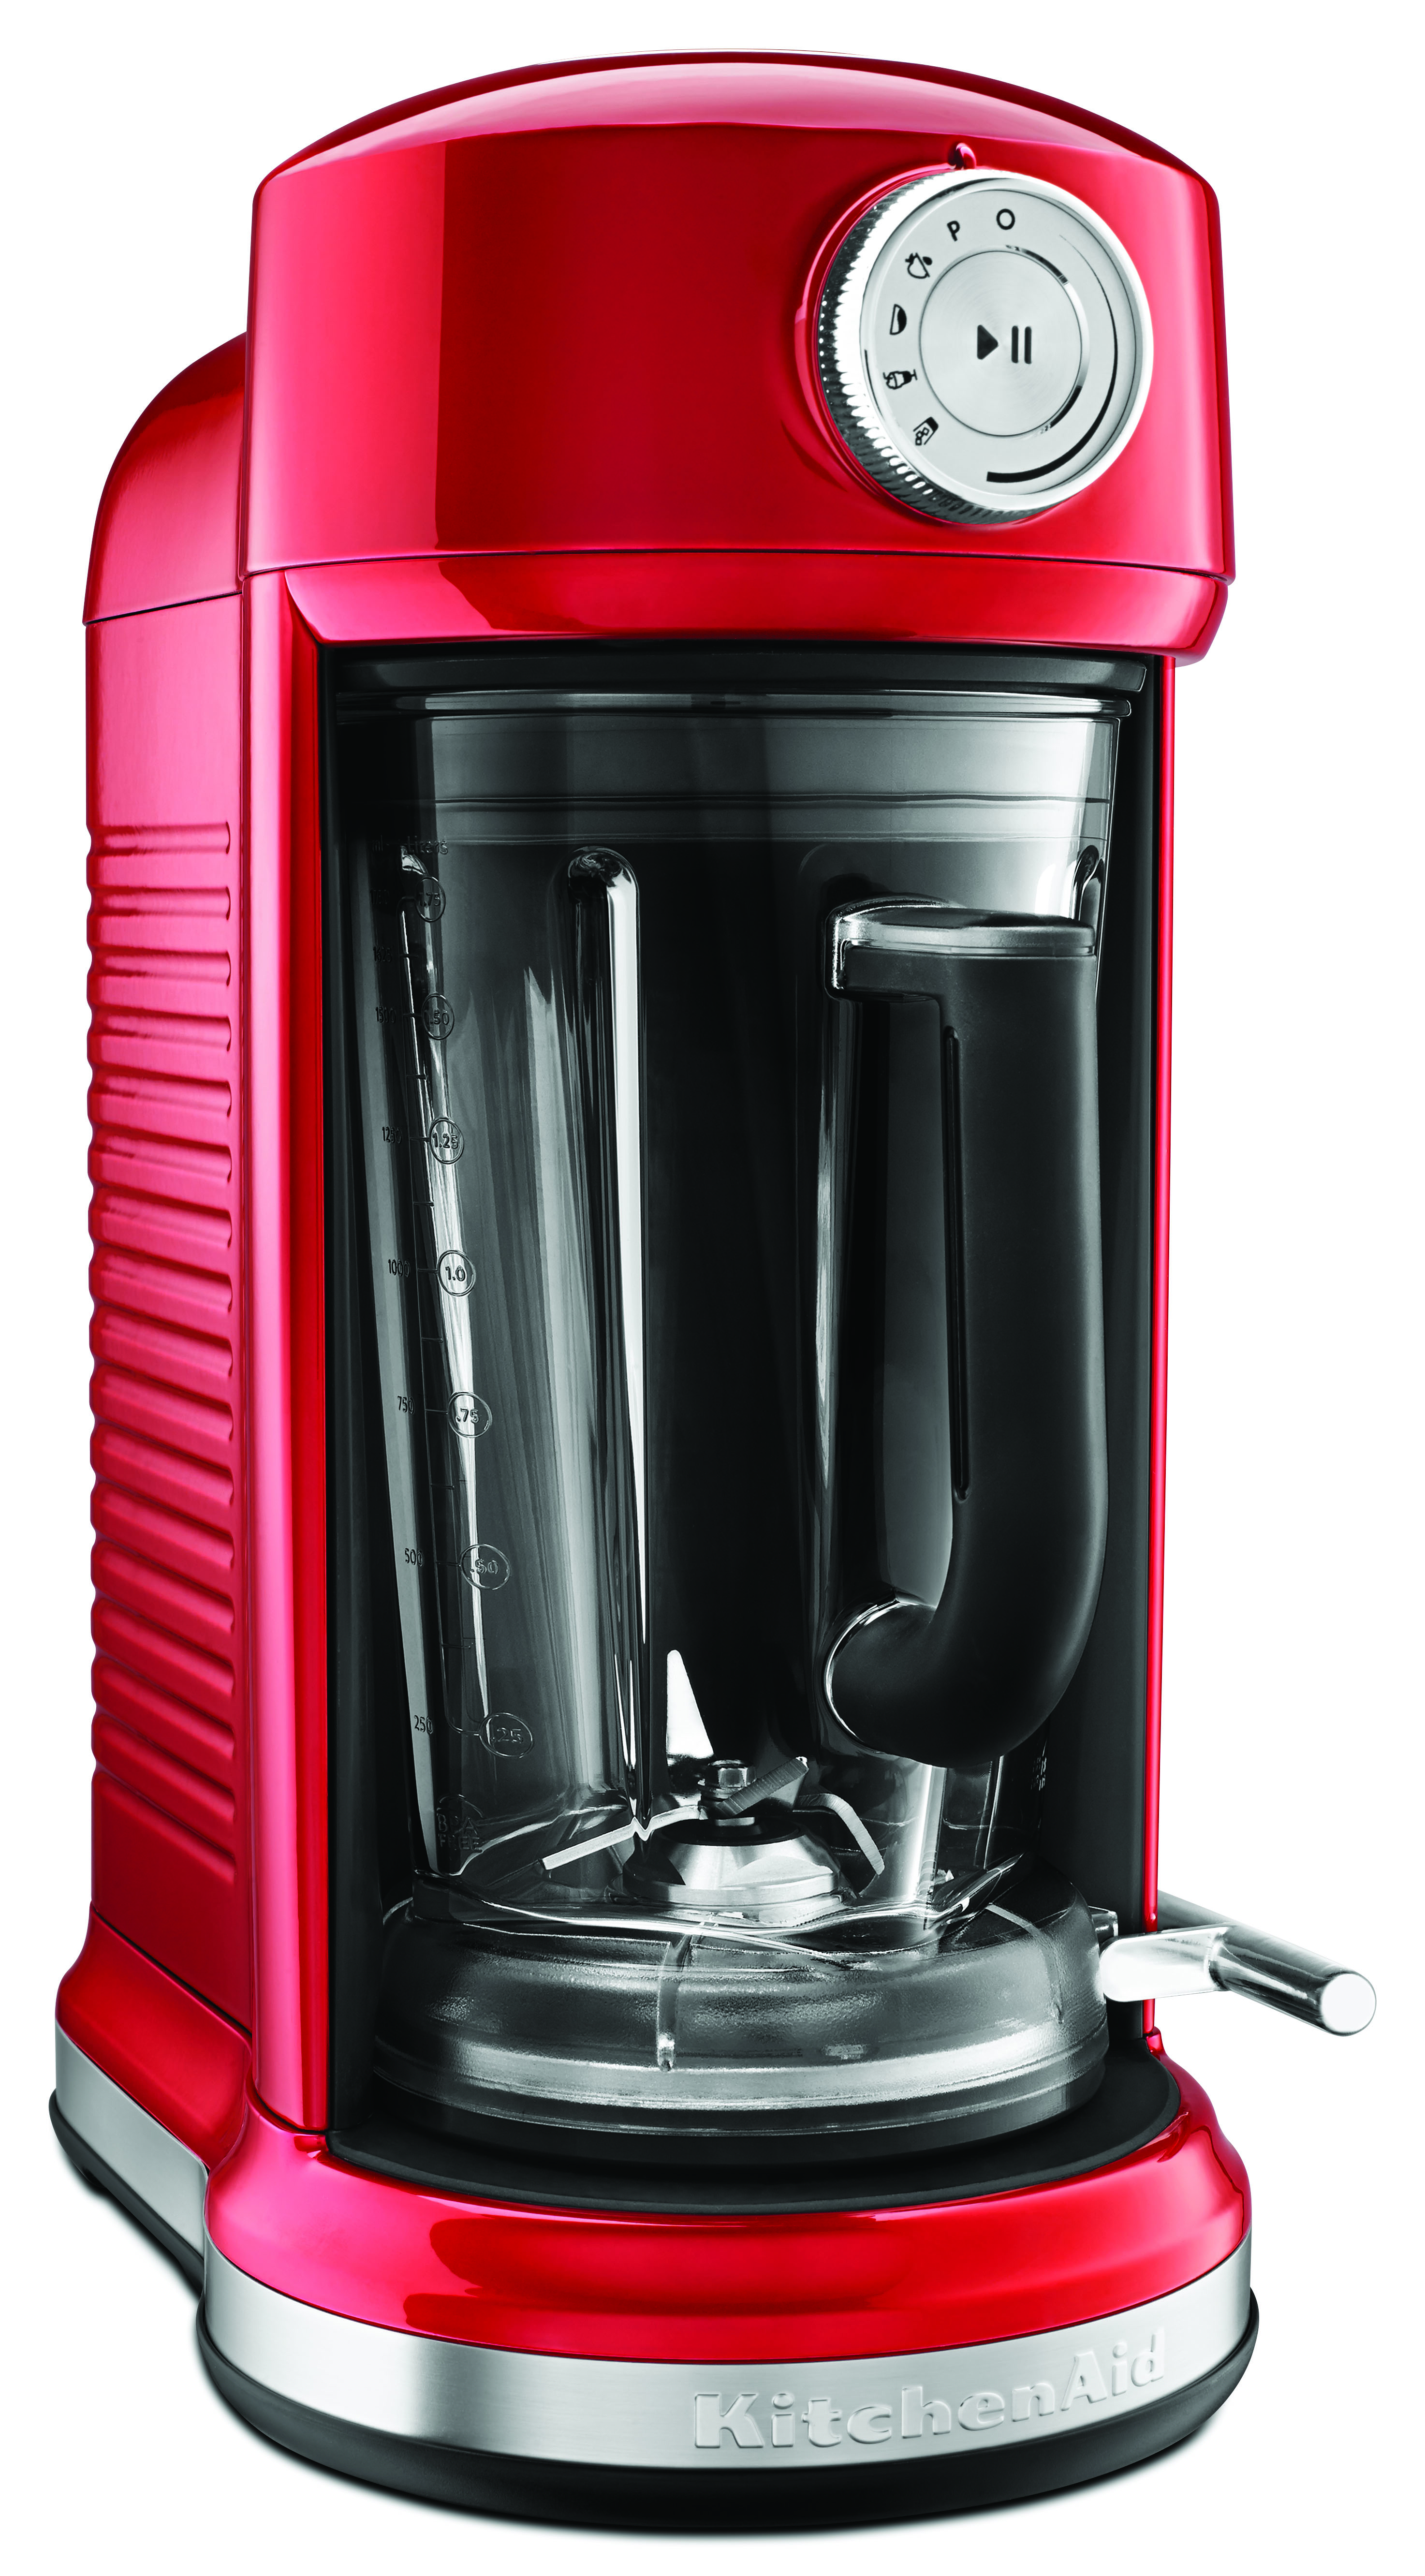 Mixers and Blenders Compete for the Premium Purchase - Kitchenware